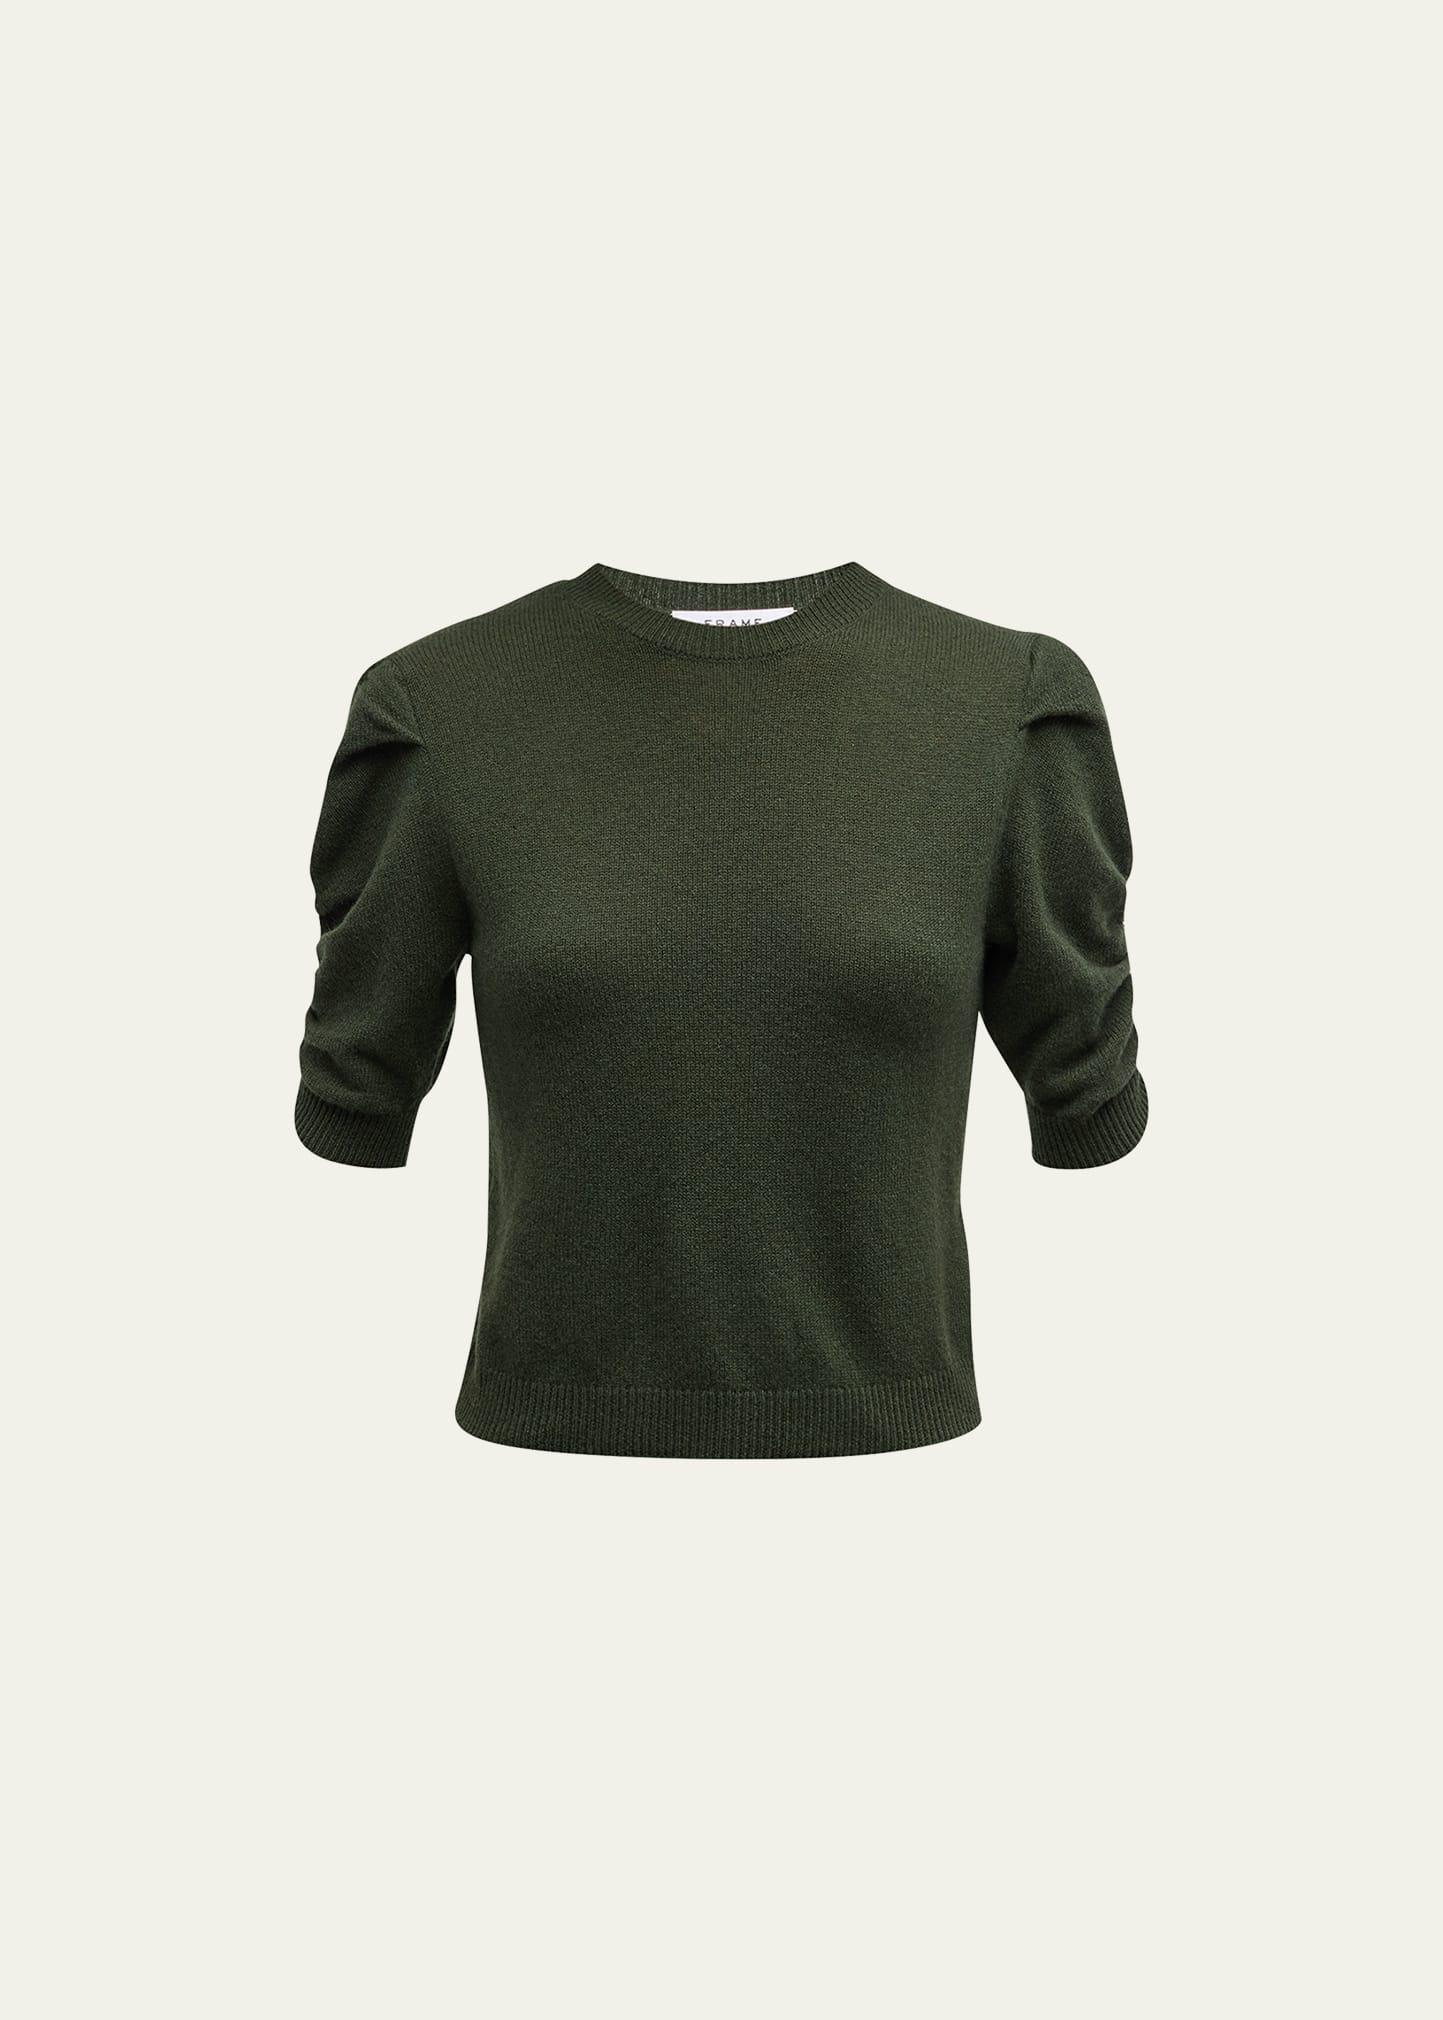 FRAME Ruched Sleeve Recycled Cashmere Blend Sweater Product Image